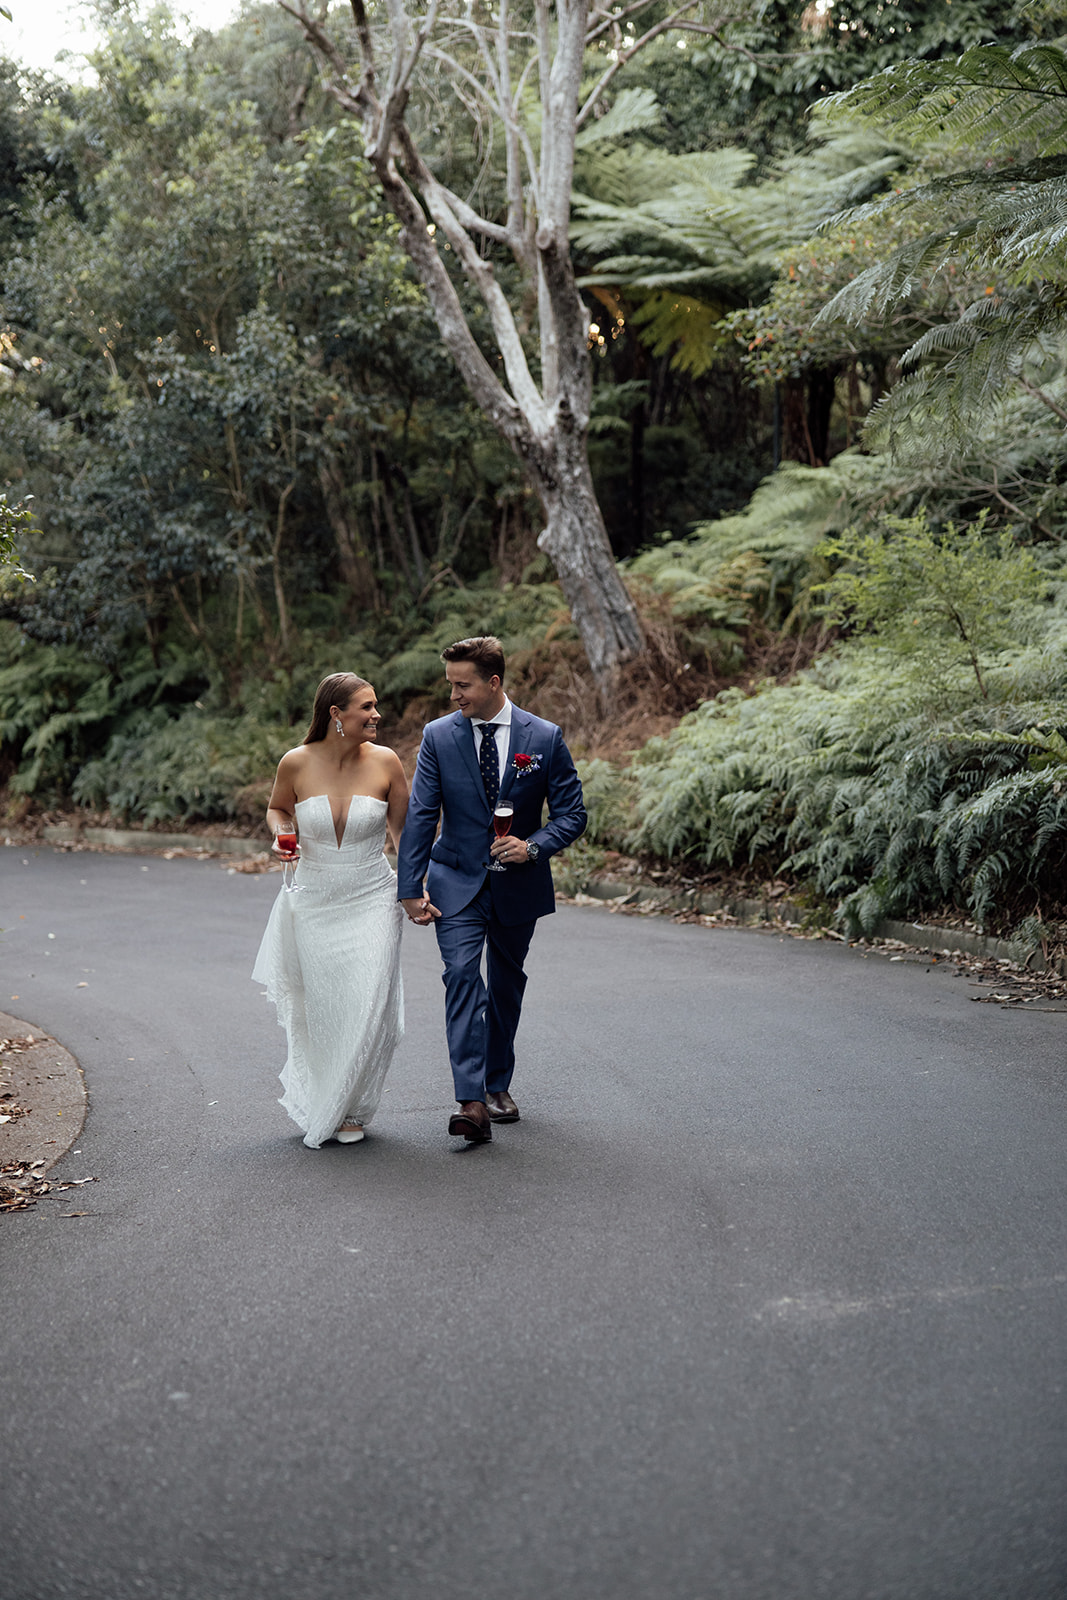 A bride and groom walking up a road with trees